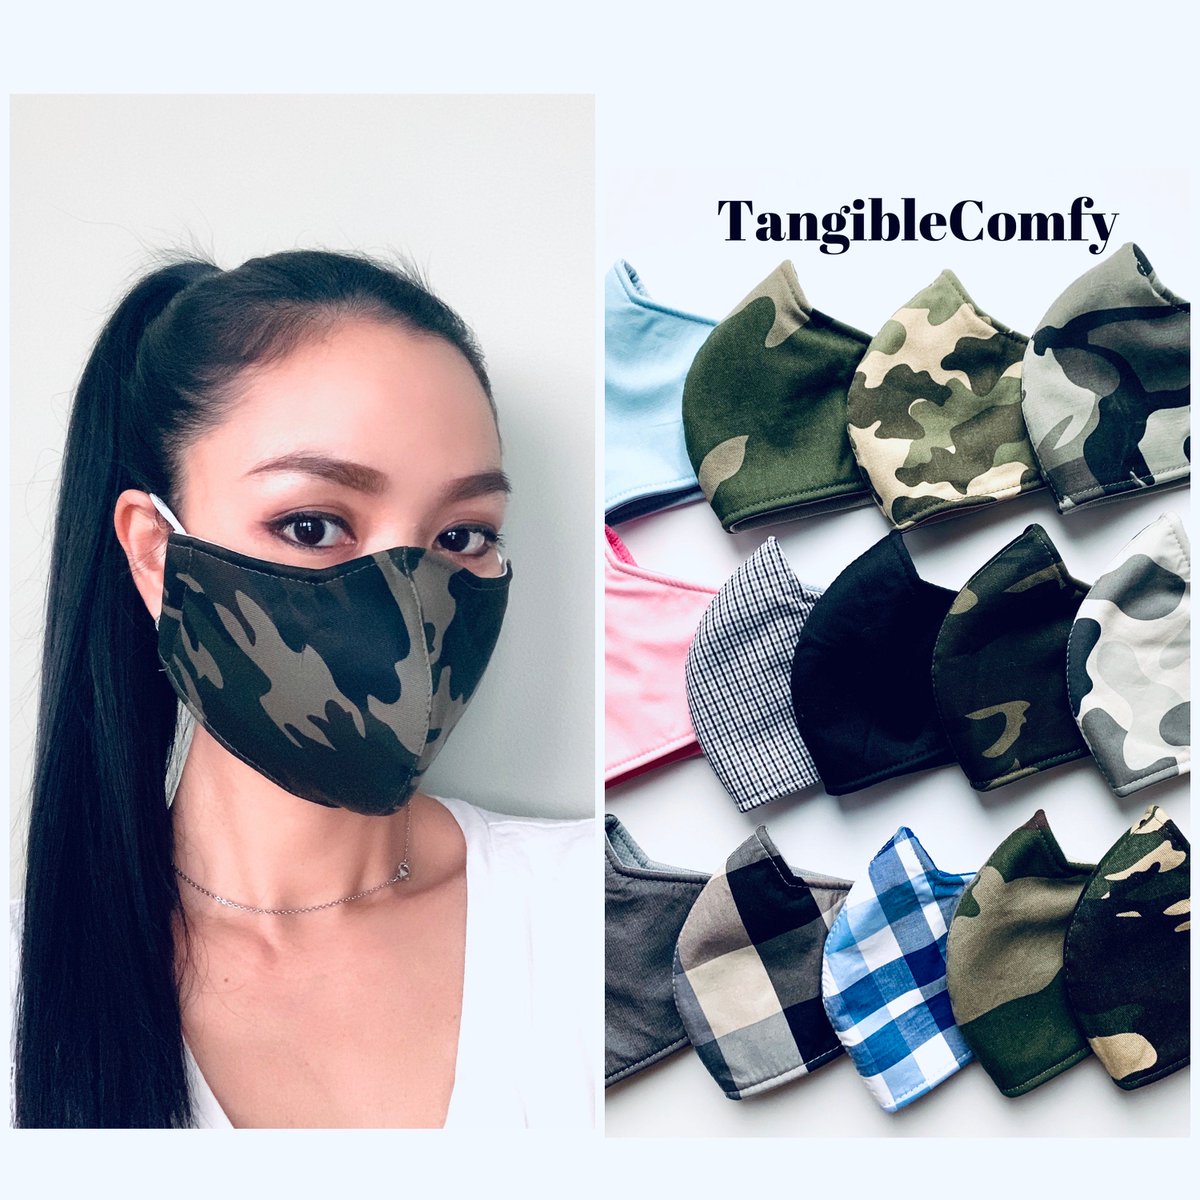 Excited to share the latest addition to my #etsy shop: Cotton face mask, cloth face mask, reusable face mask, washable mask, mask with filter, camo face mask etsy.me/2JSpsrR #black #elastic #no #adult #facemask #washablemask #filtermask #reusablefacemask #facem